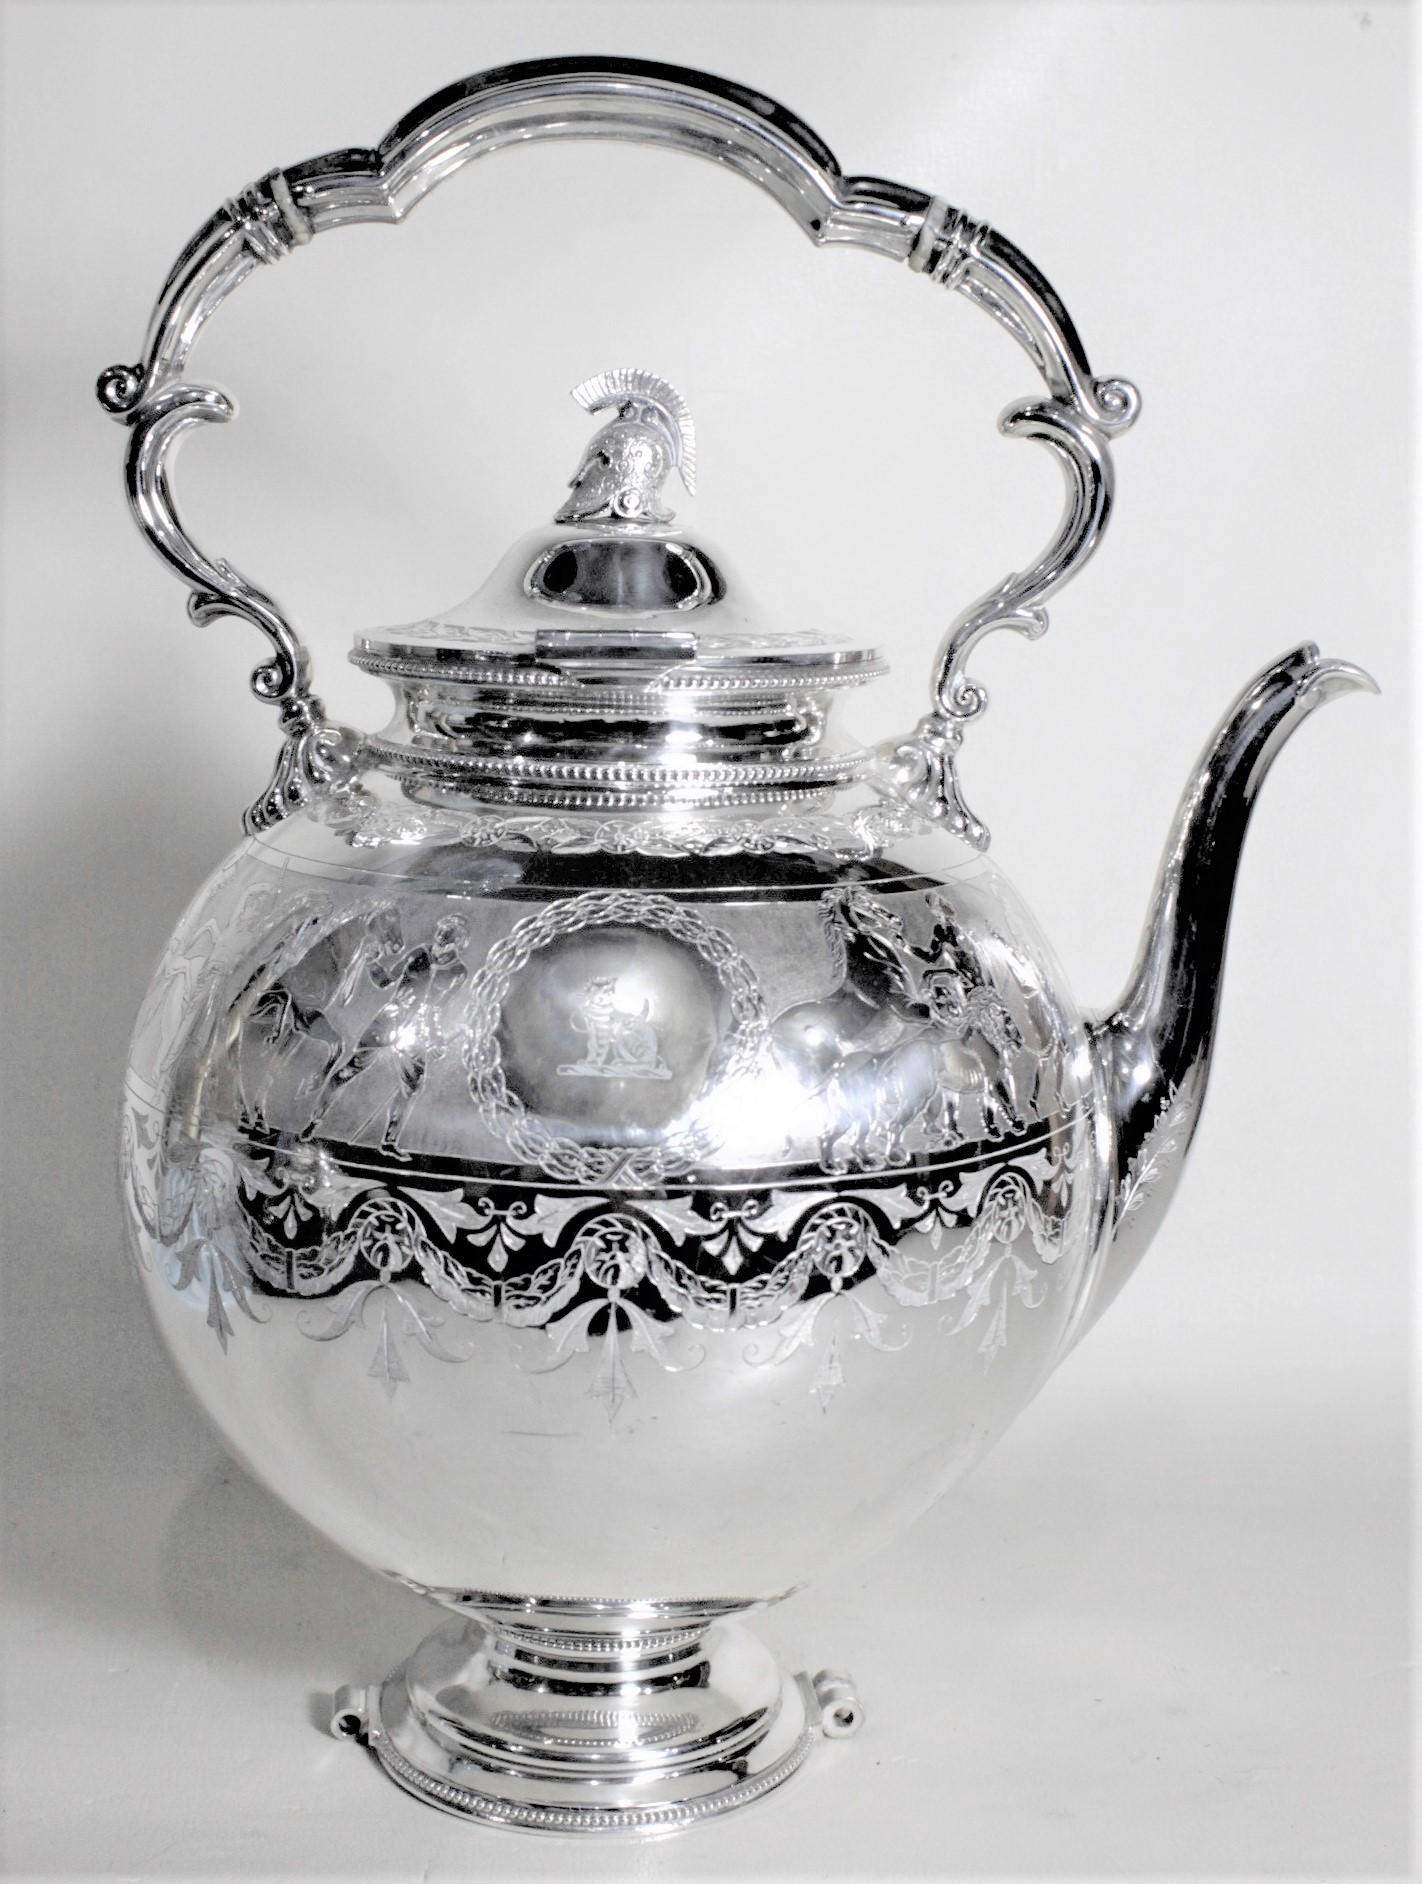 Metal Antique English Silver Plated Tipping Teapot or Kettle with Helmut Top and Stand For Sale